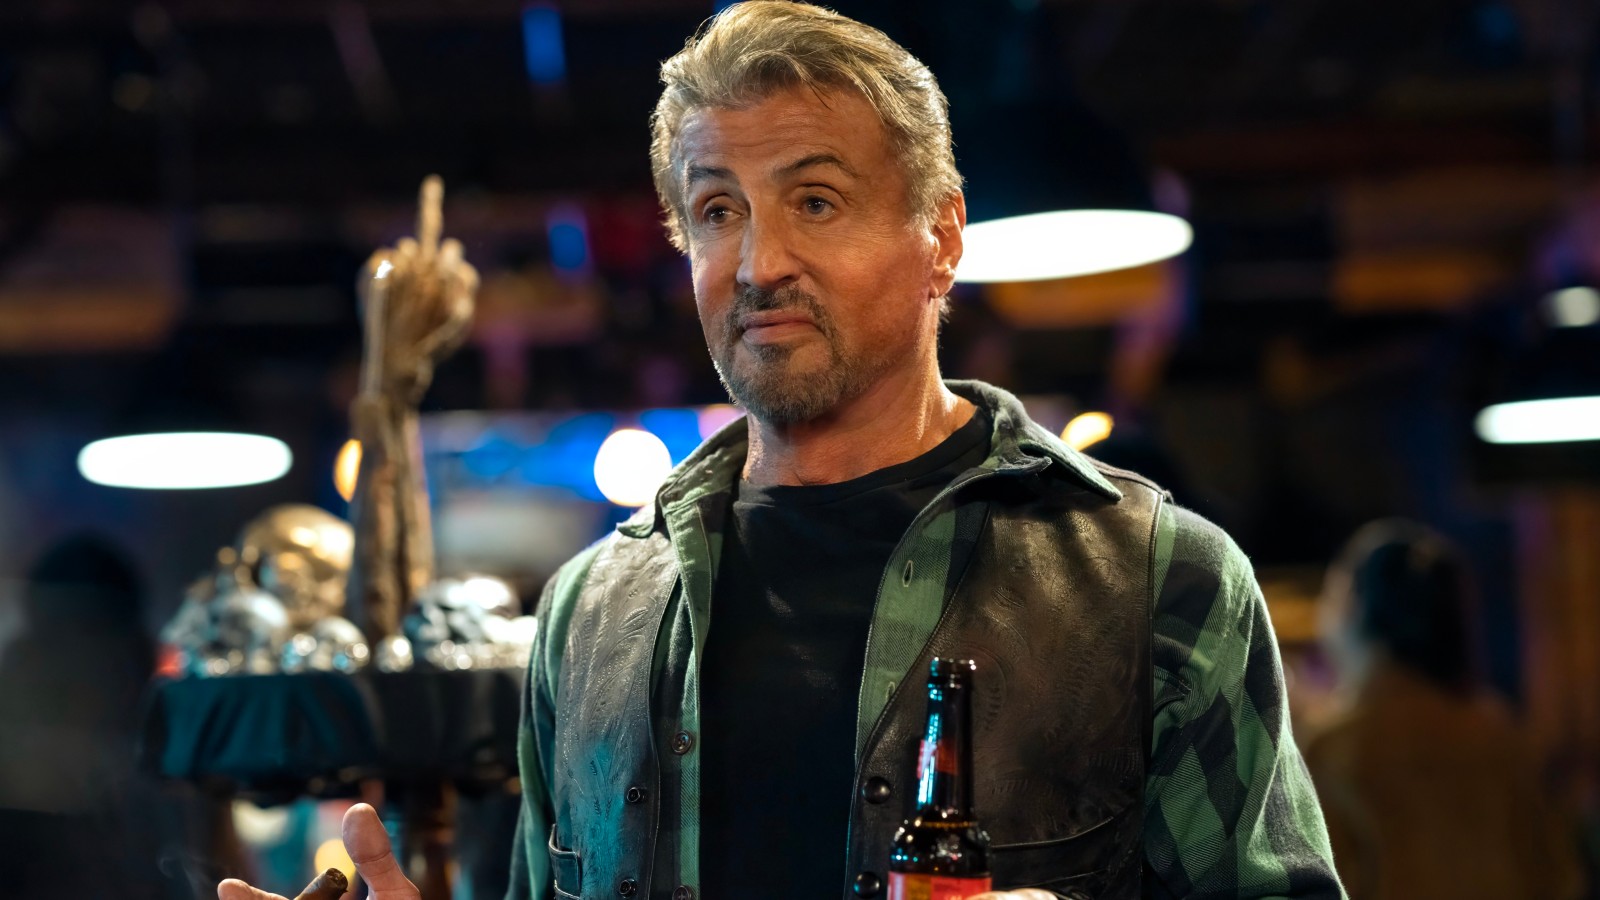 Sylvester Stallone als Barney Ross in den Expendables 4